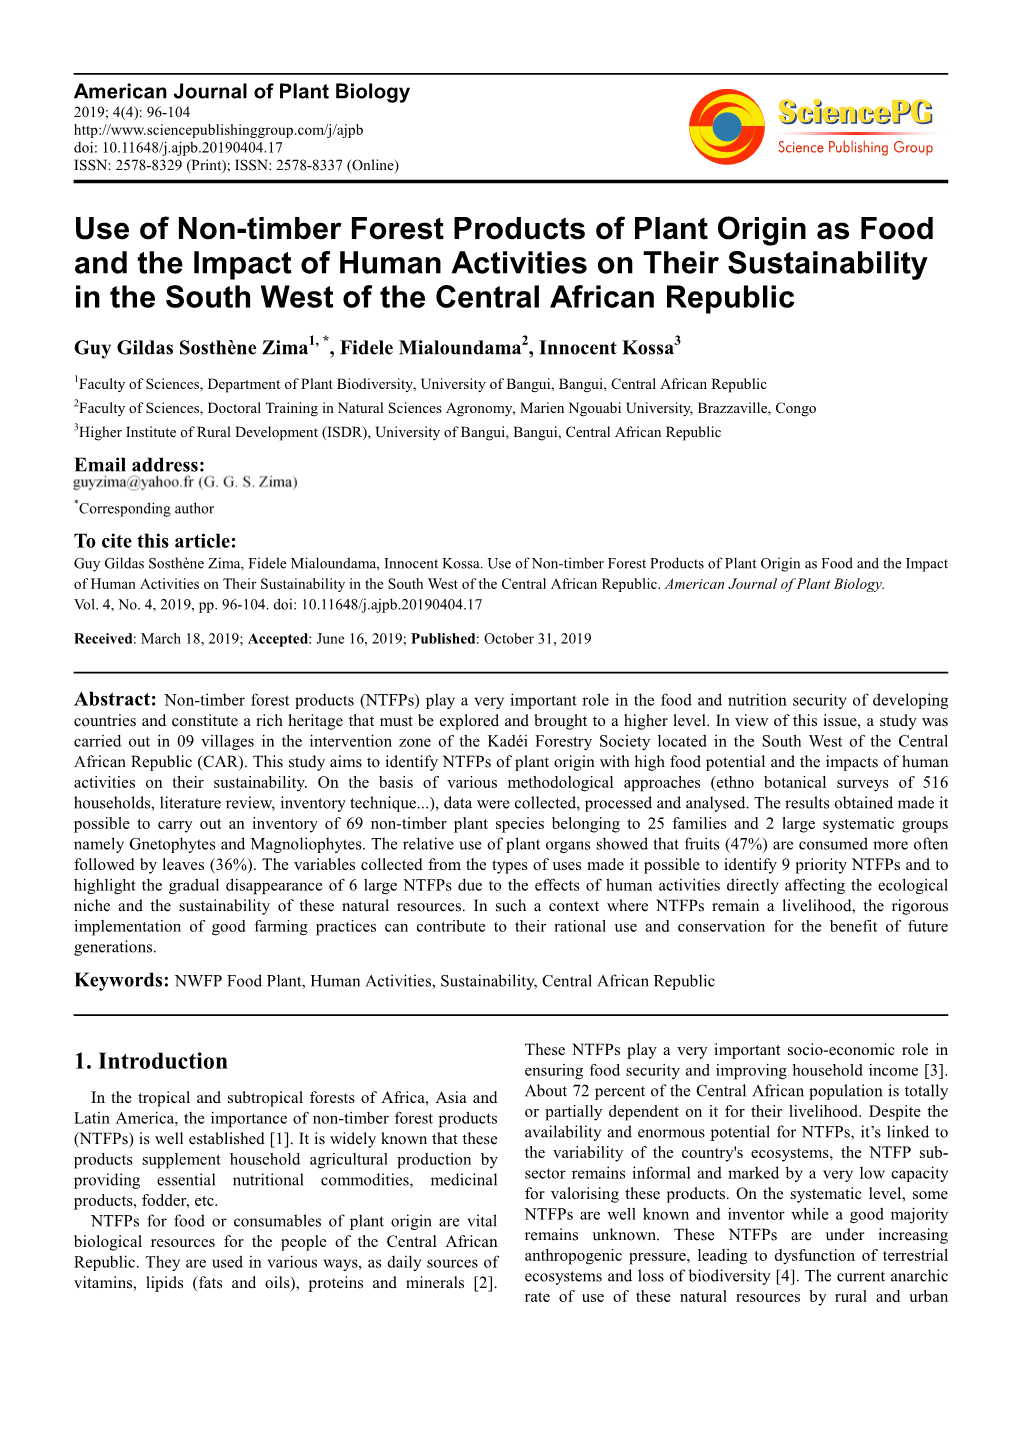 Use of Non-Timber Forest Products of Plant Origin As Food and the Impact